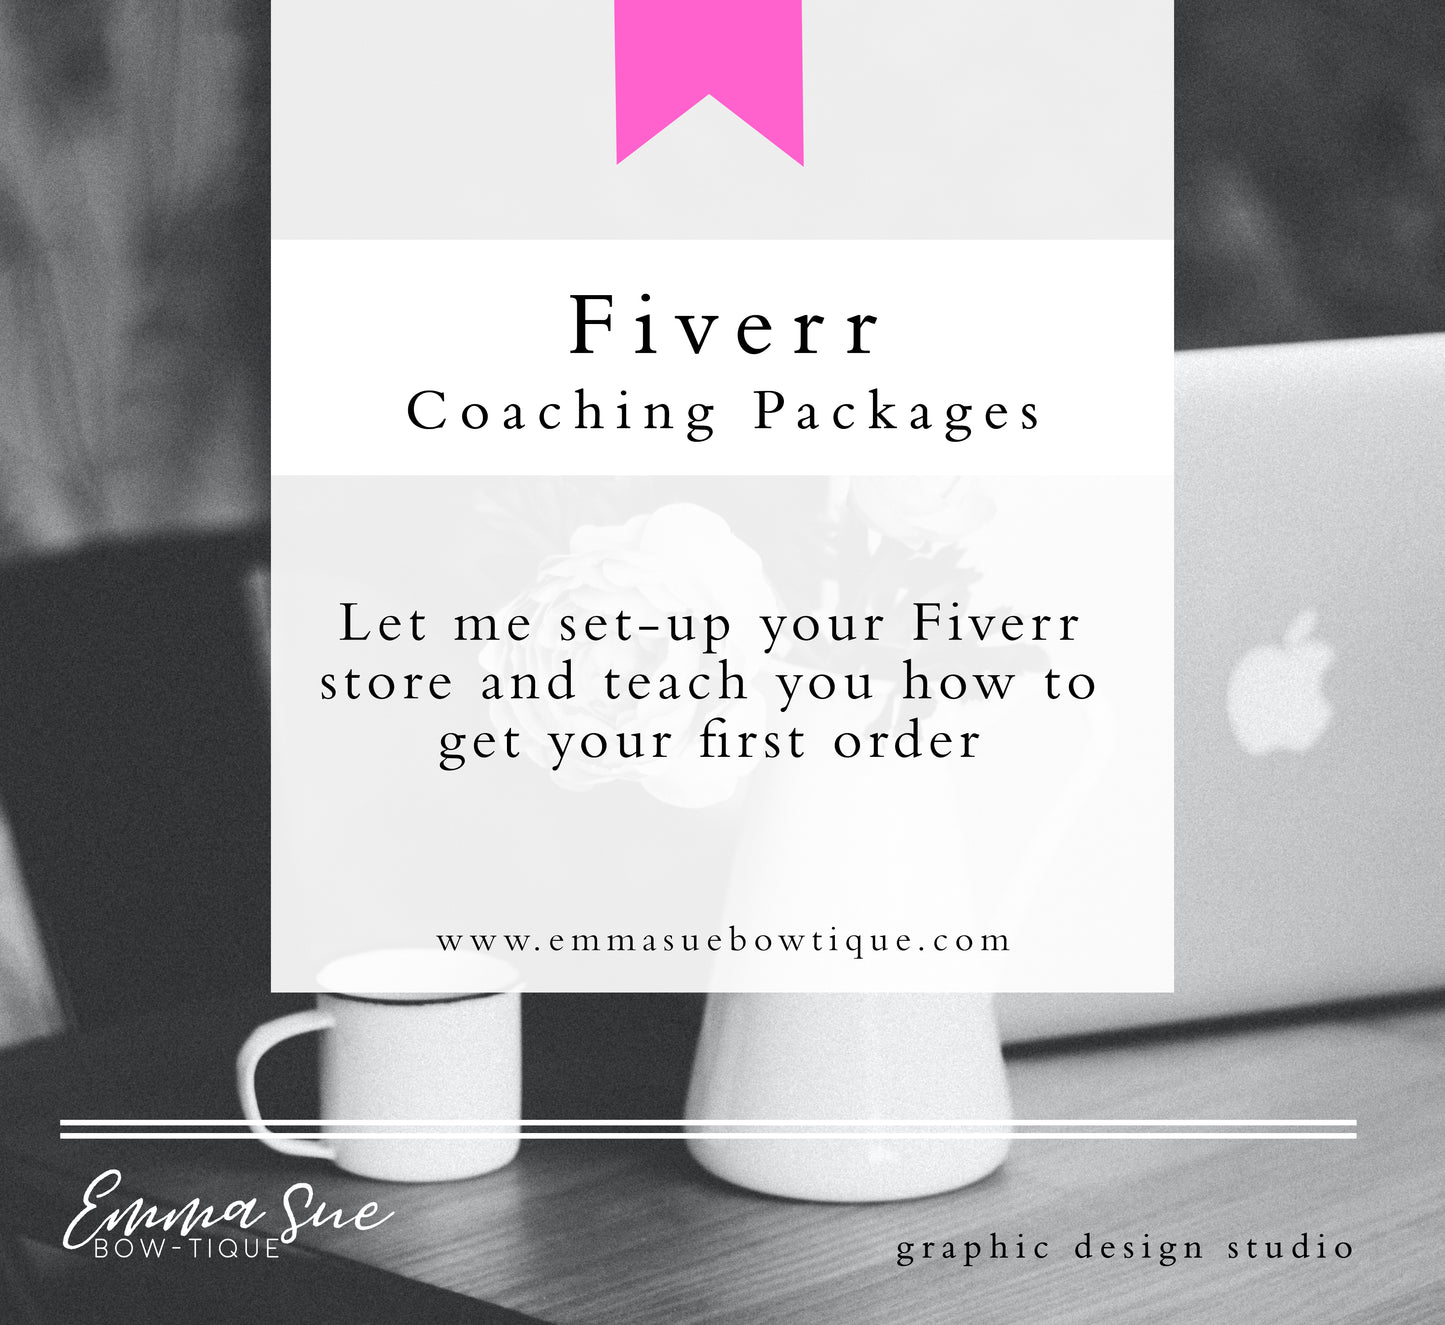 Fiverr Coaching Packages